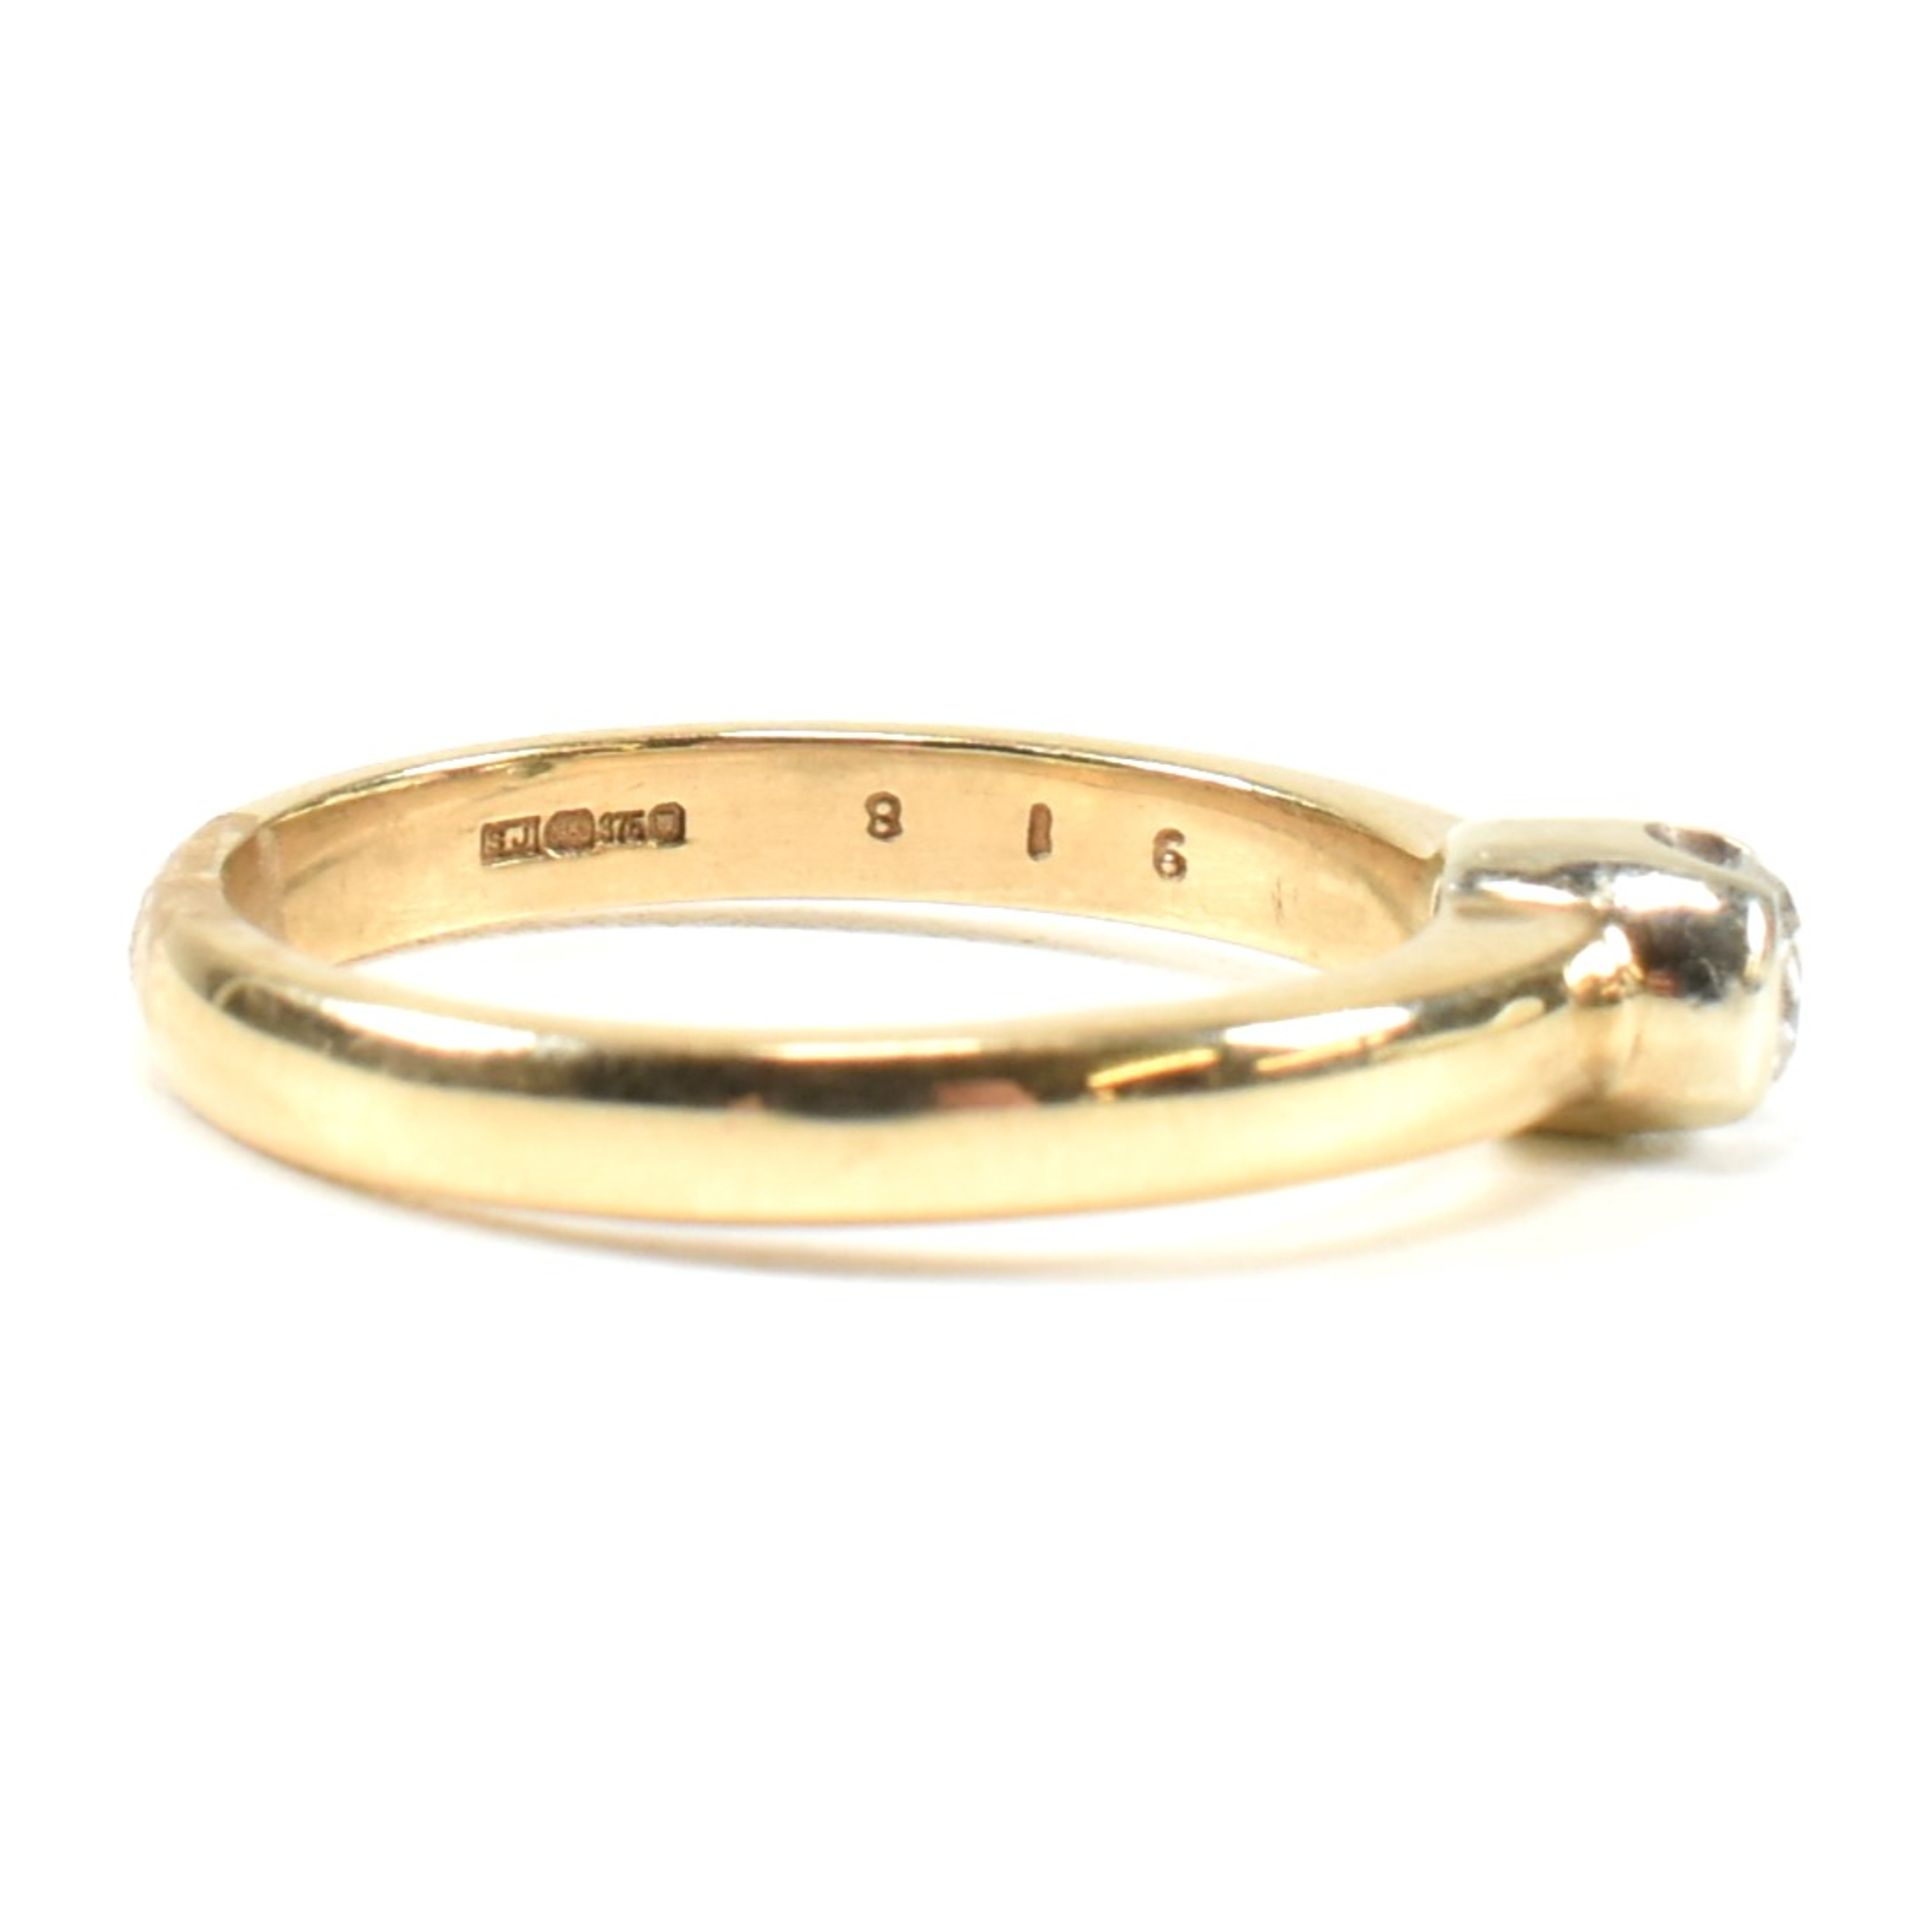 HALLMARKED 9CT GOLD & DIAMOND SOLITAIRE RING - Image 5 of 8